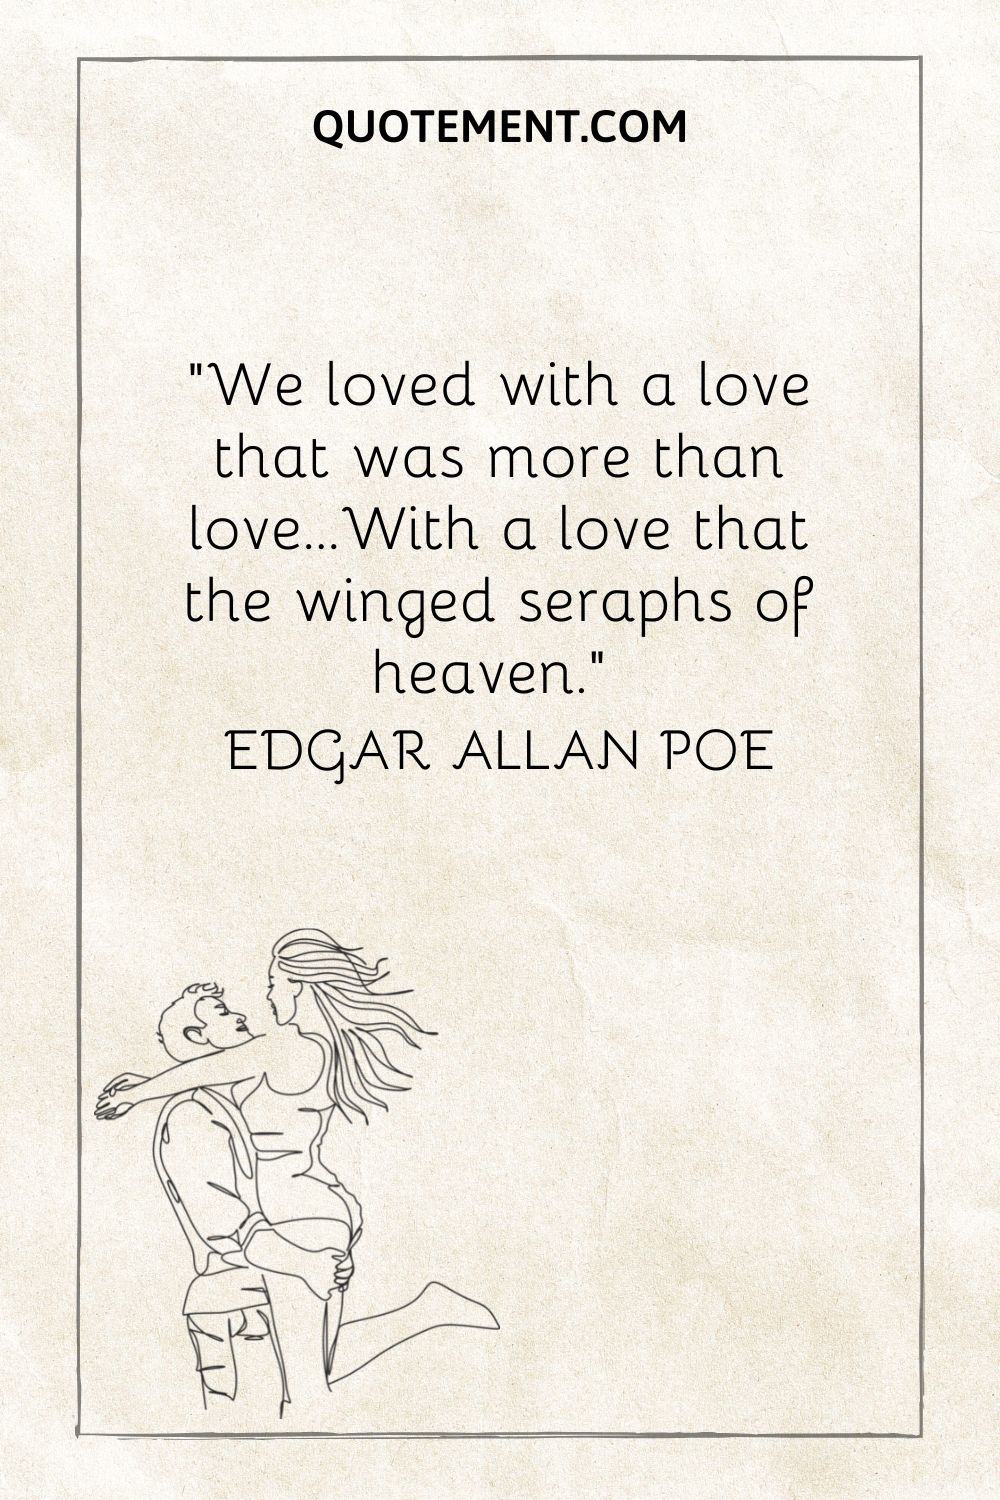 two people hugging representing edgar allan poe quote about love